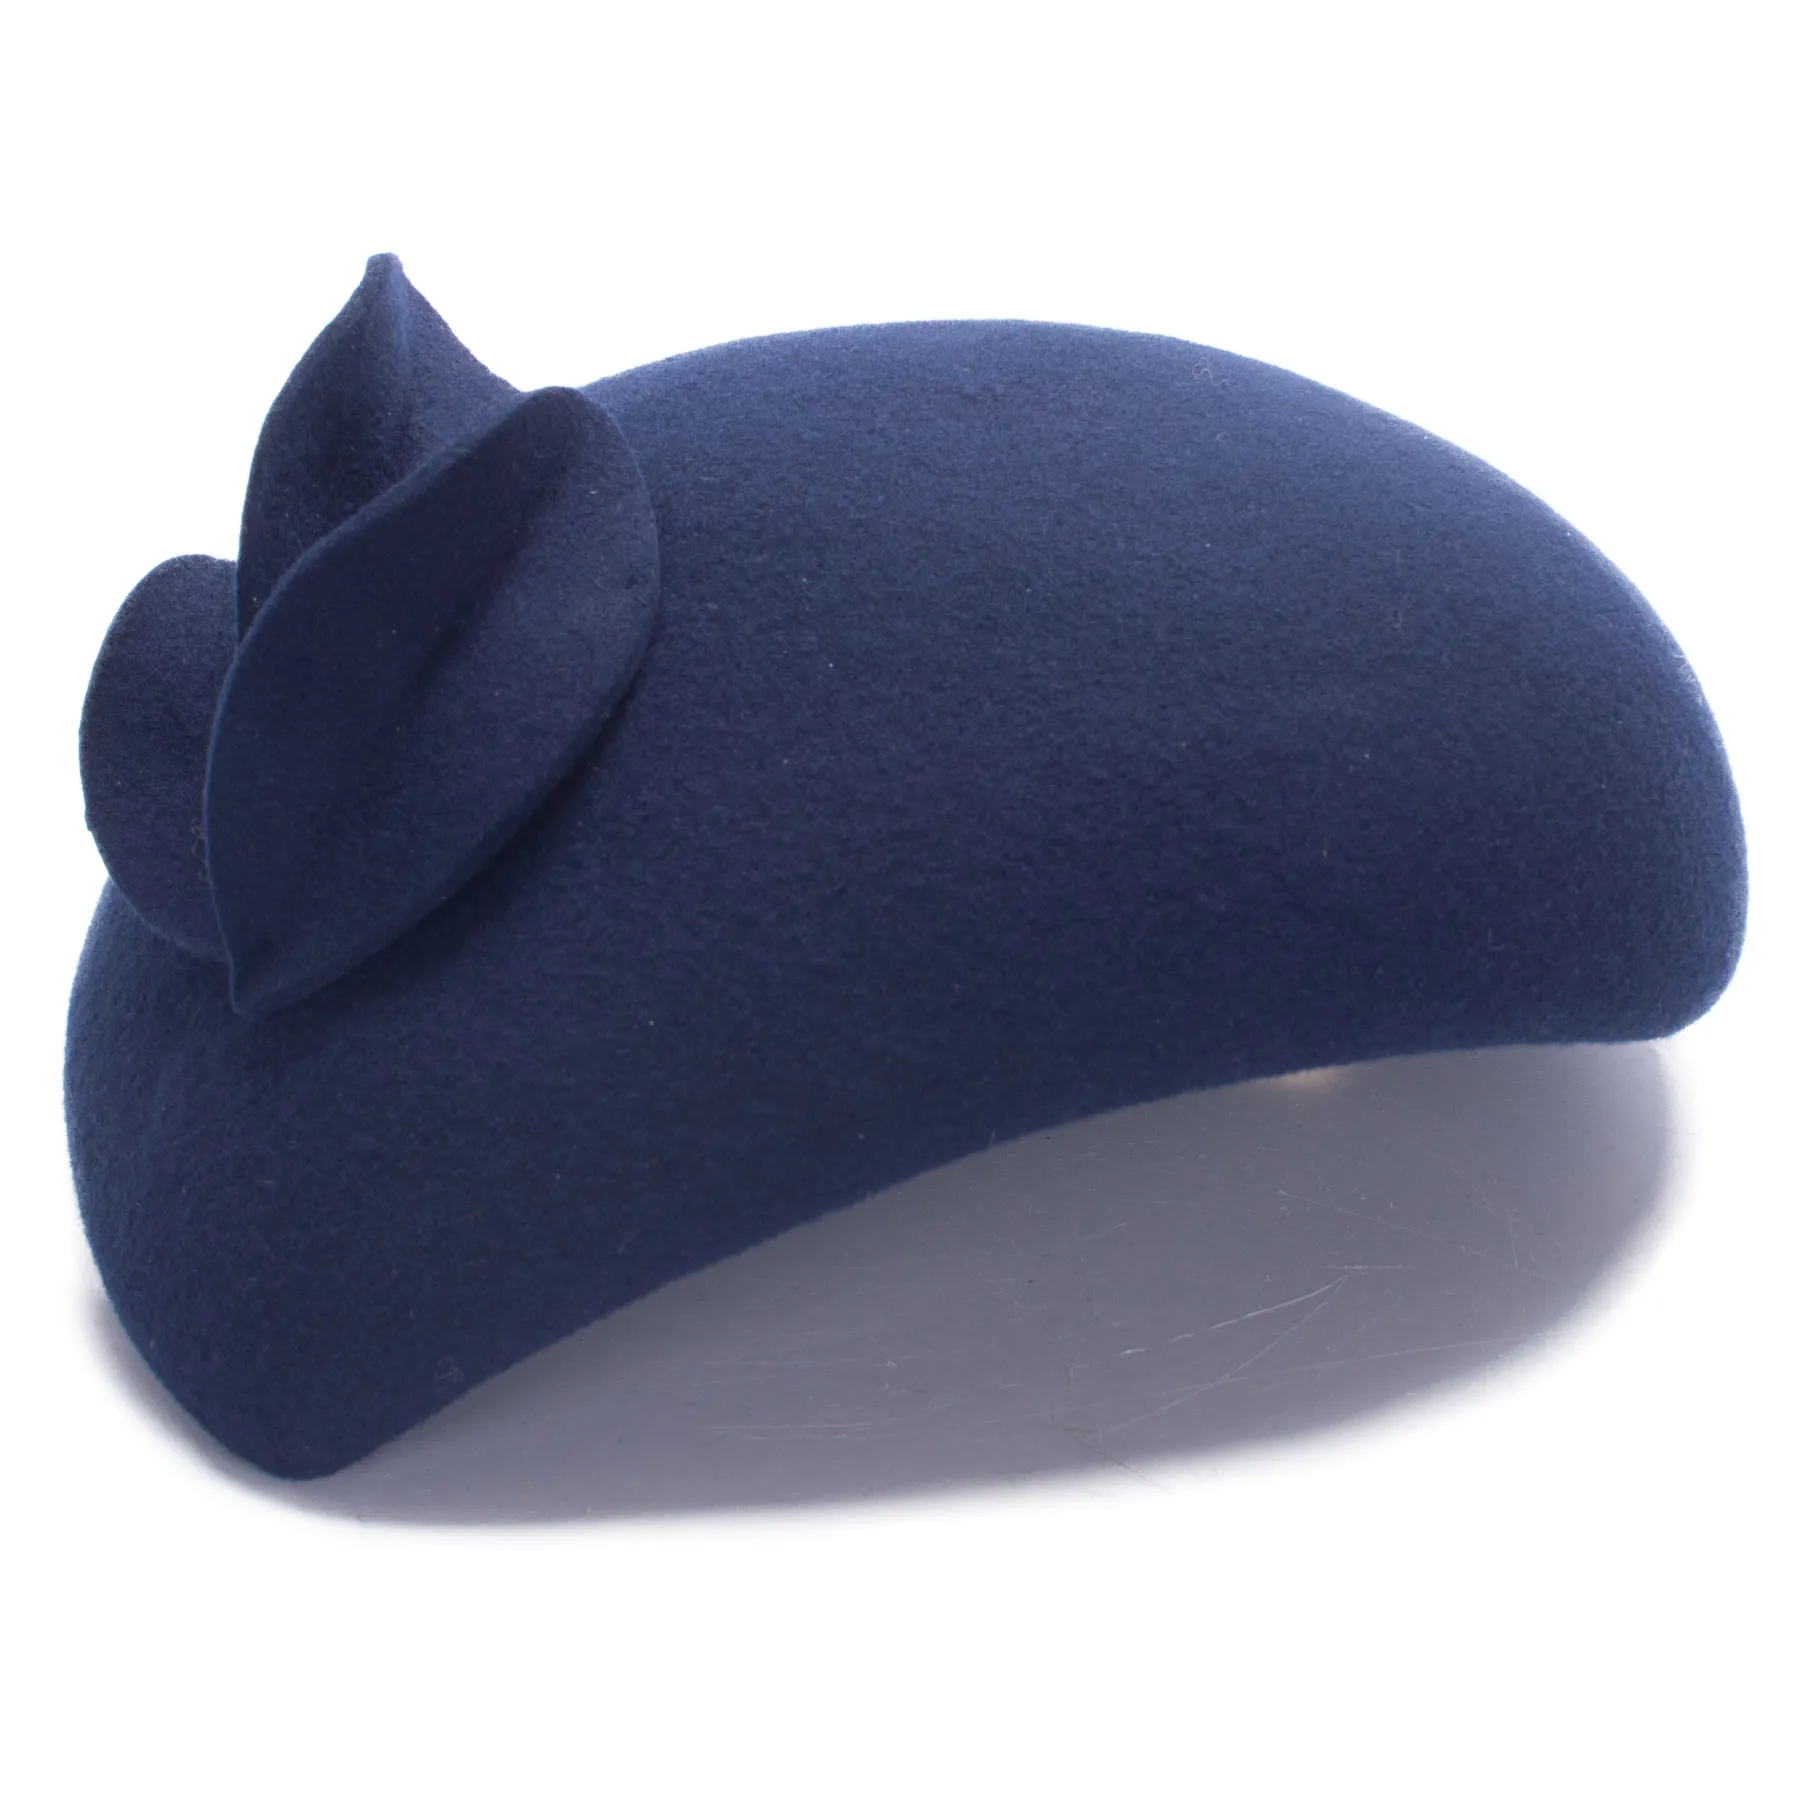 

Lawliet Teardrop Womens British style wool felt fascinator hat with flowers Tam Beret Casque Cocktail Hat A574